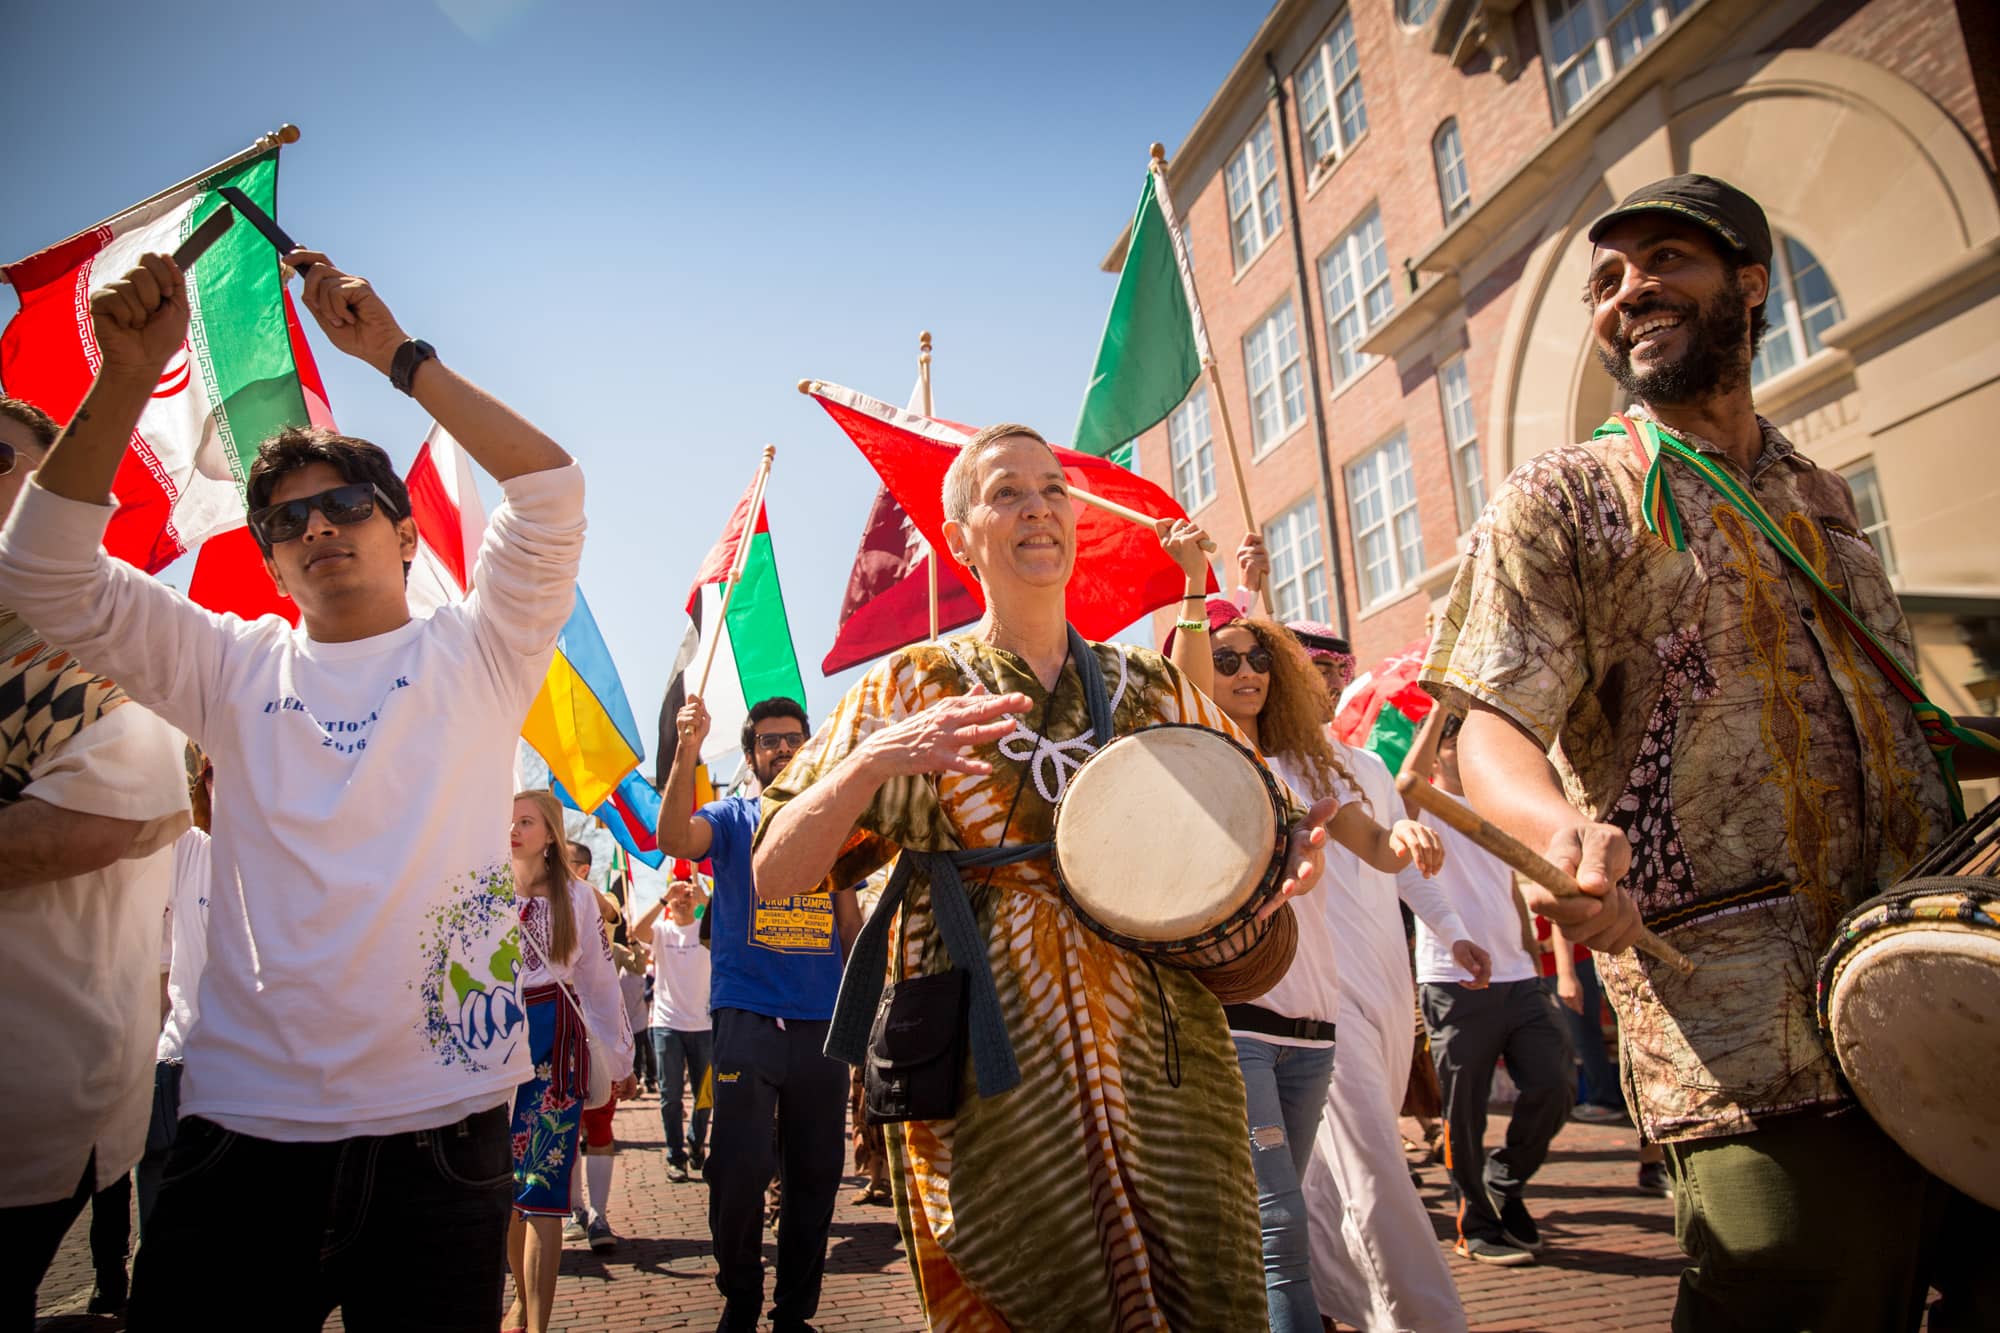 The Ohio University International Street Fair in uptown Athens celebrates the many international individuals in the community, allowing them to share their culture, food, stories, and history with fellow Athenians.